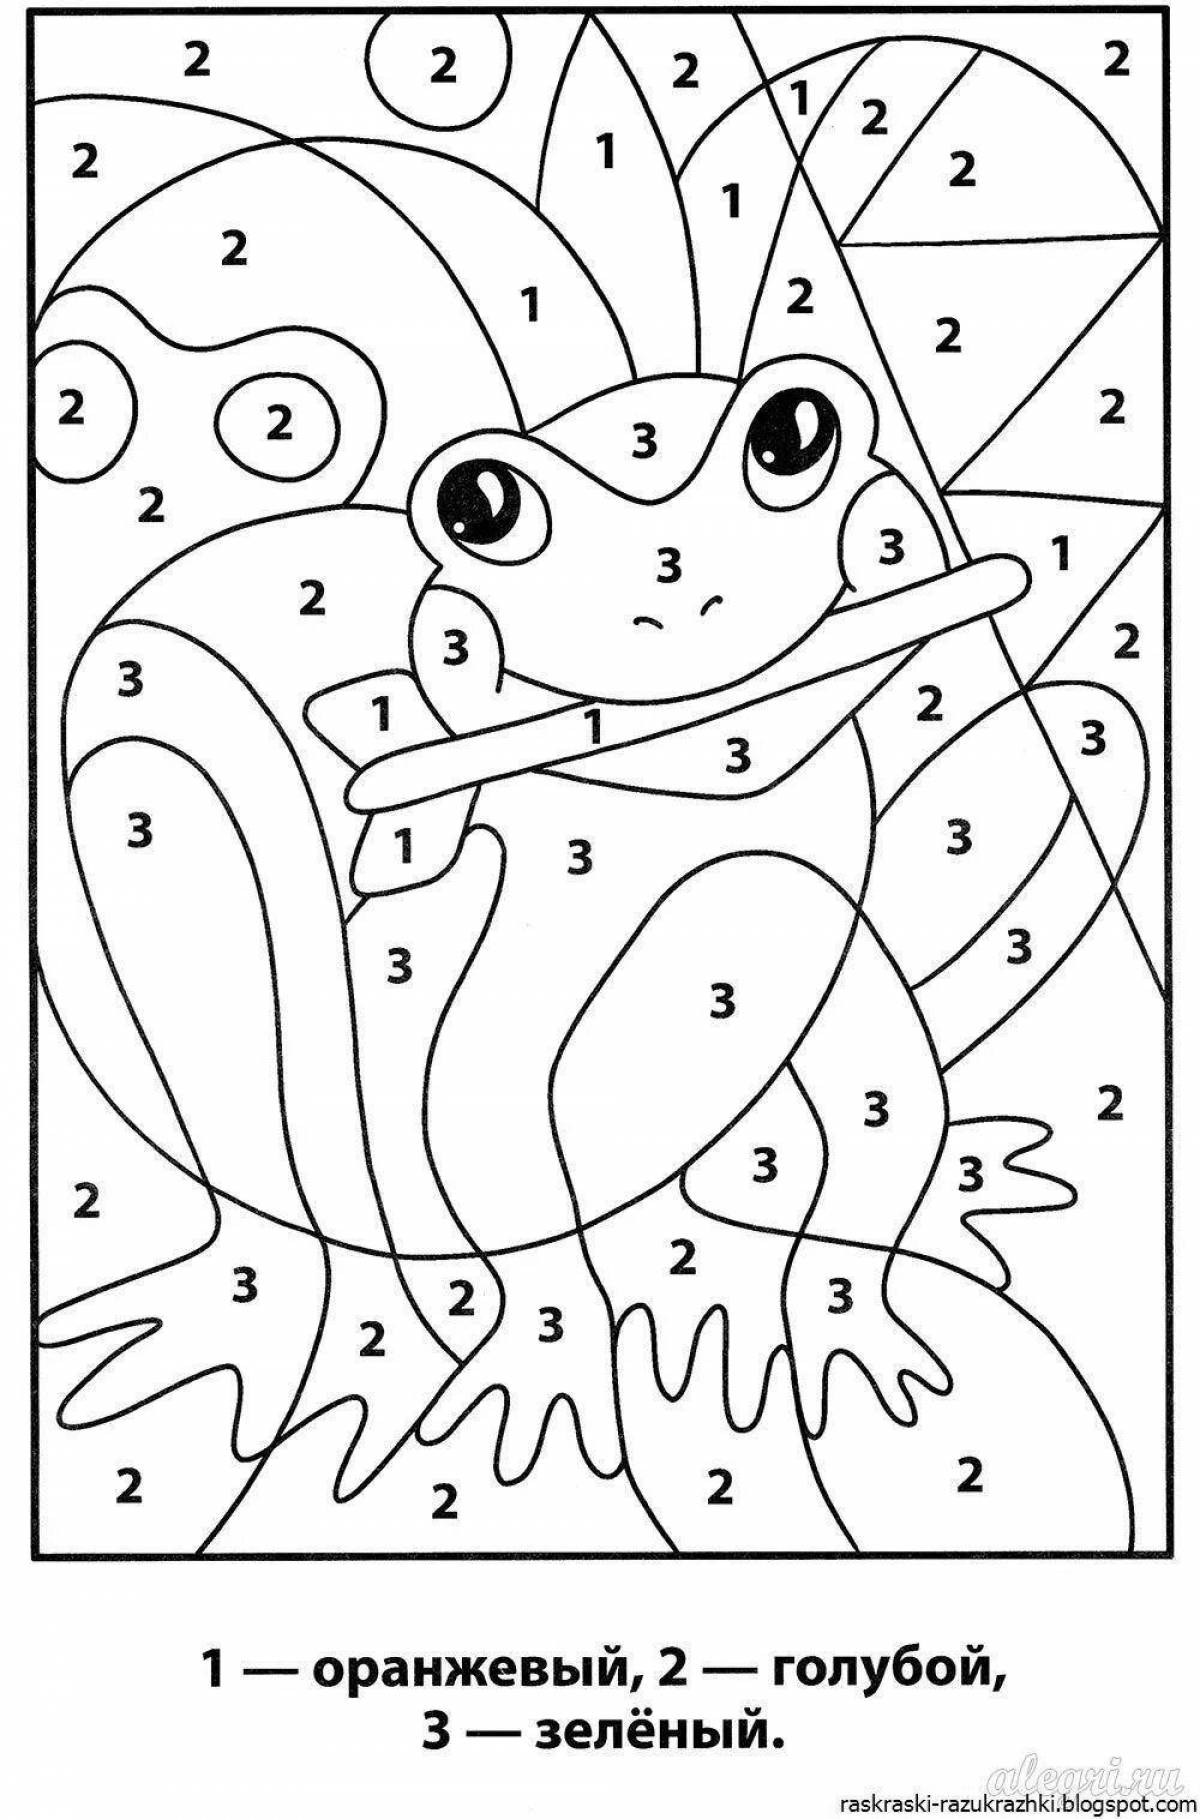 Stimulating coloring book for 5-6 year olds